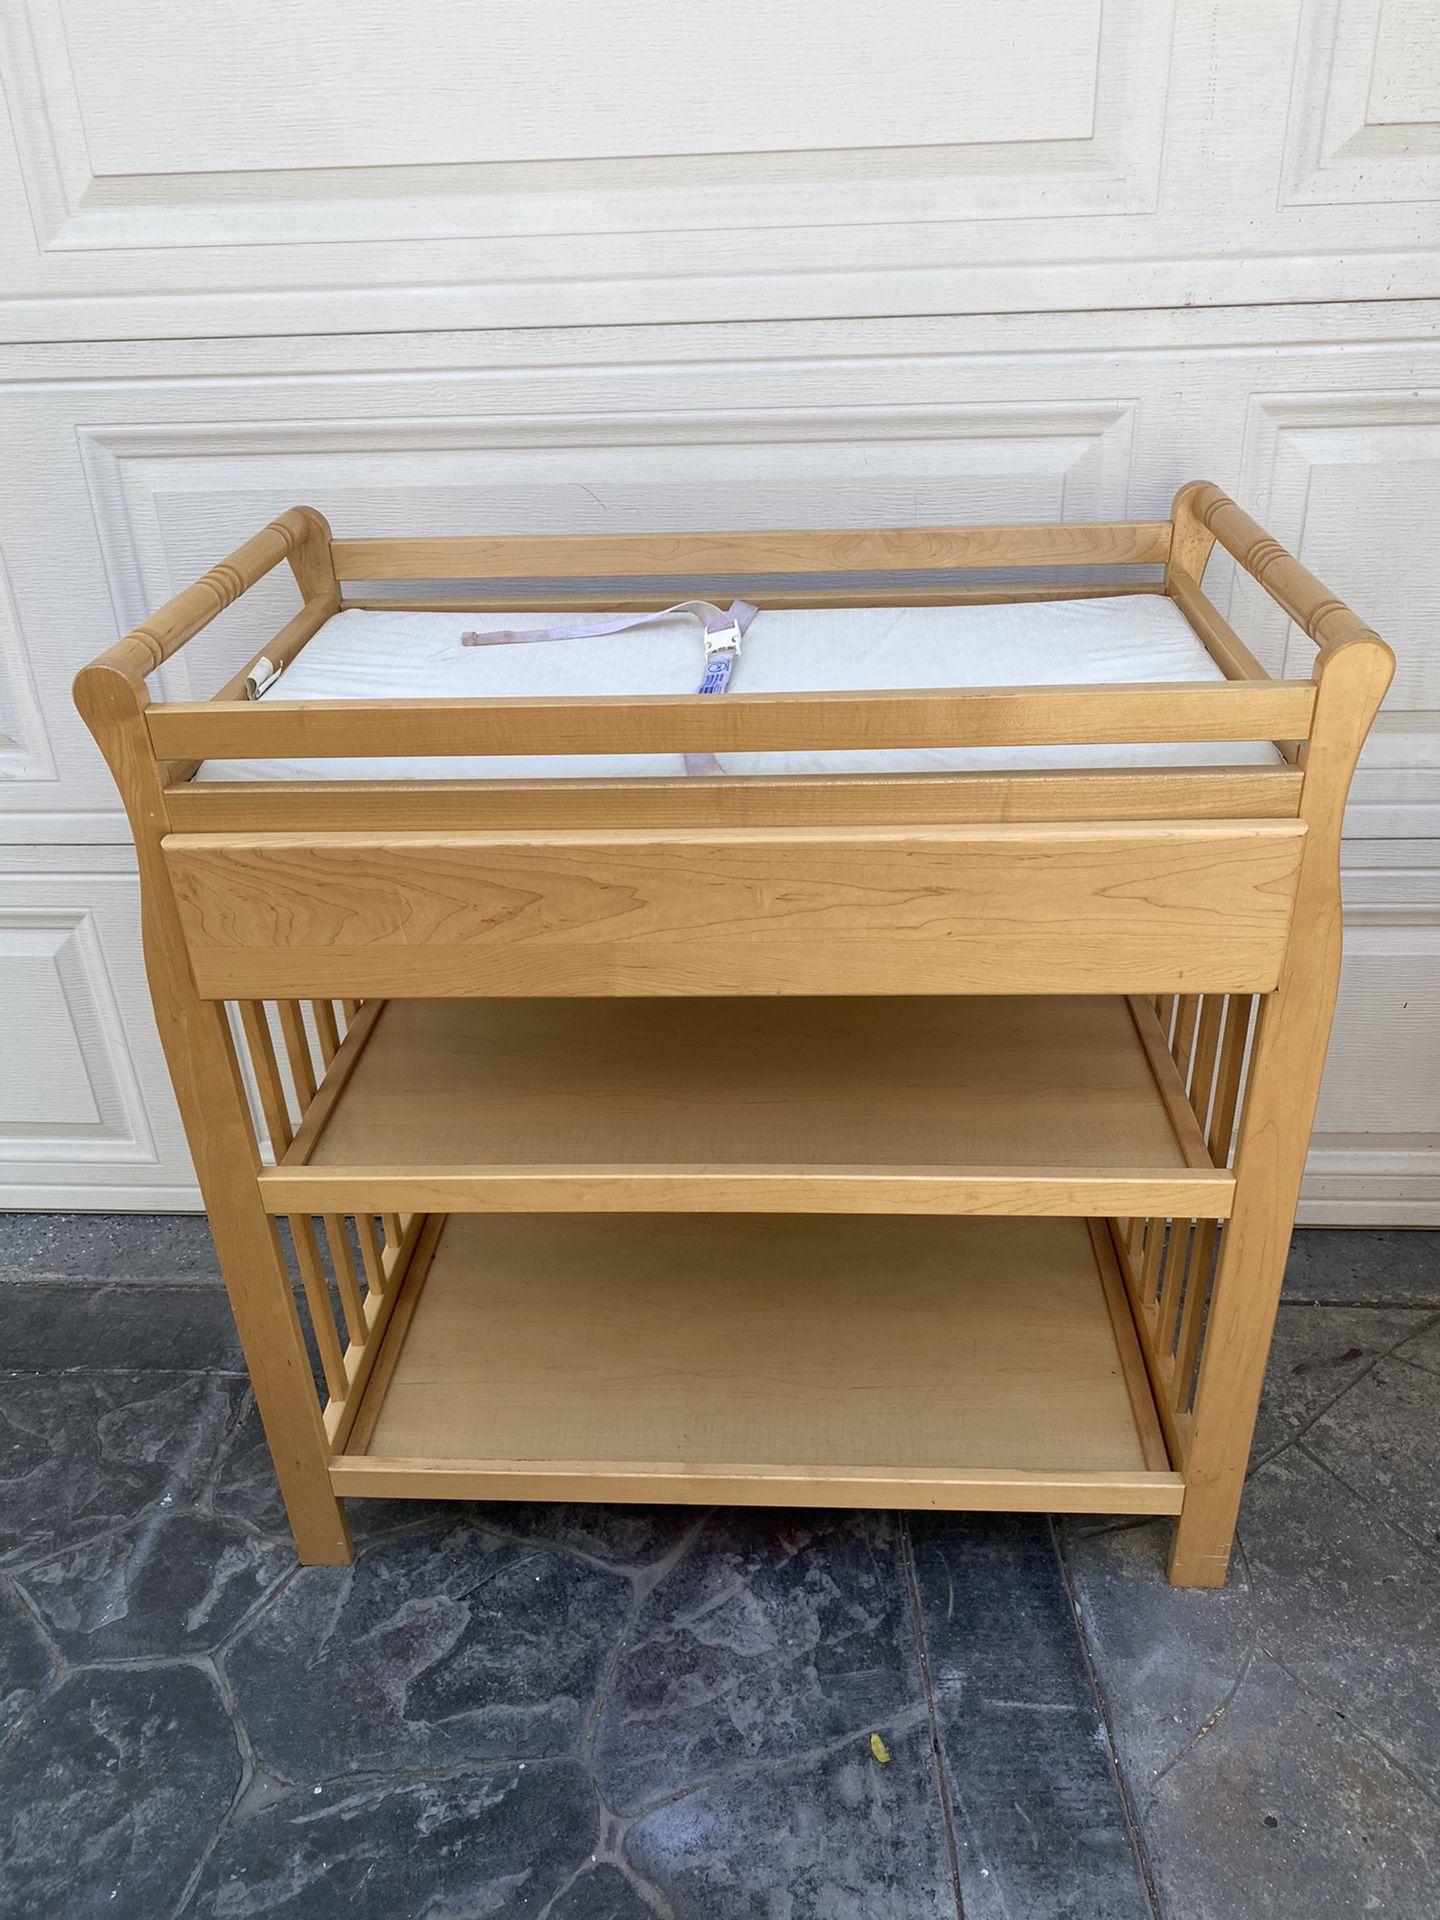 Maplewood changing table with pull out drawers and shelves. $30 measurements 35L by 19 W 5 36H.